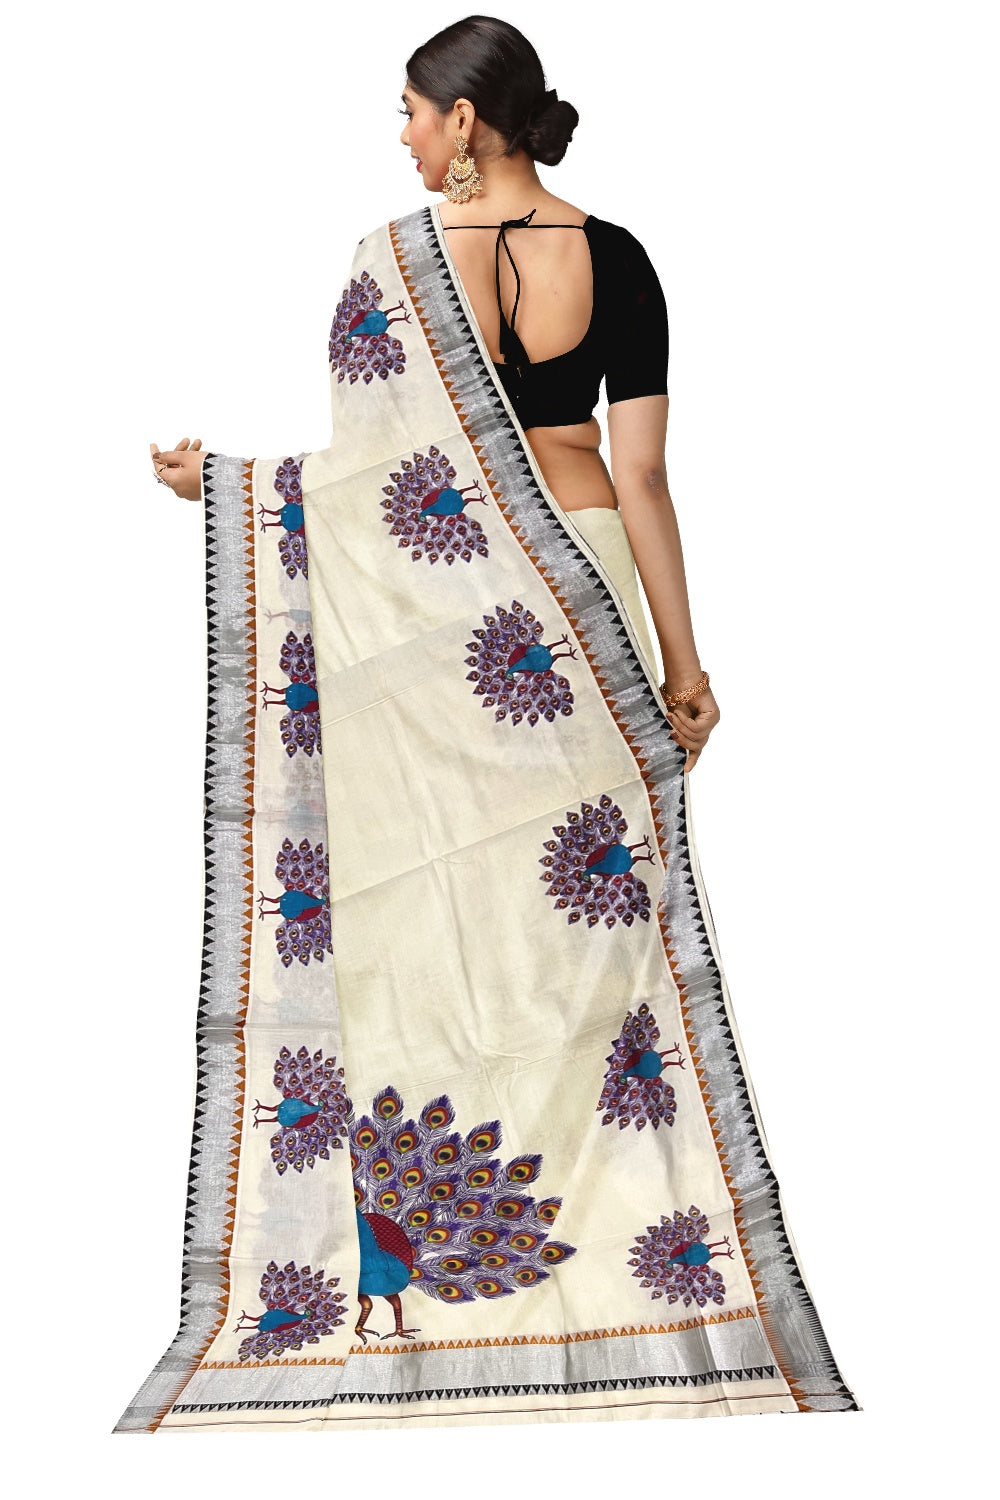 Kerala Pure Cotton Saree with Mural Printed Feather Design and Orange Brown Temple Border